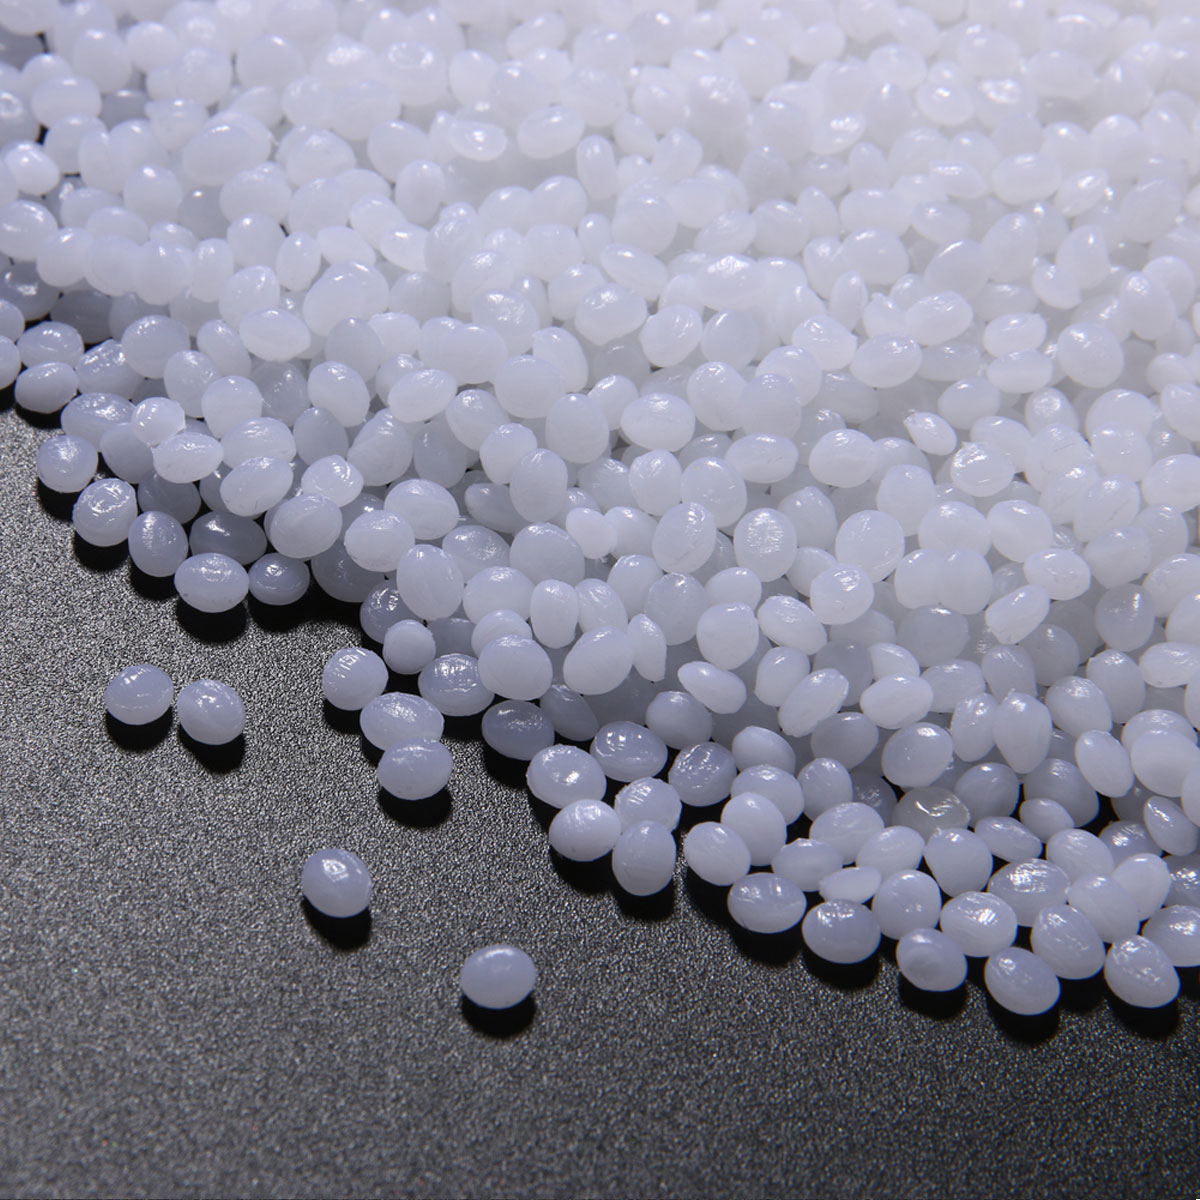 1000g-Plastic-Pellets-Thermoplastic-Particles-60-63degC-Melt-for-DIY-Jewelry-Fixing-Arts-1302793-1